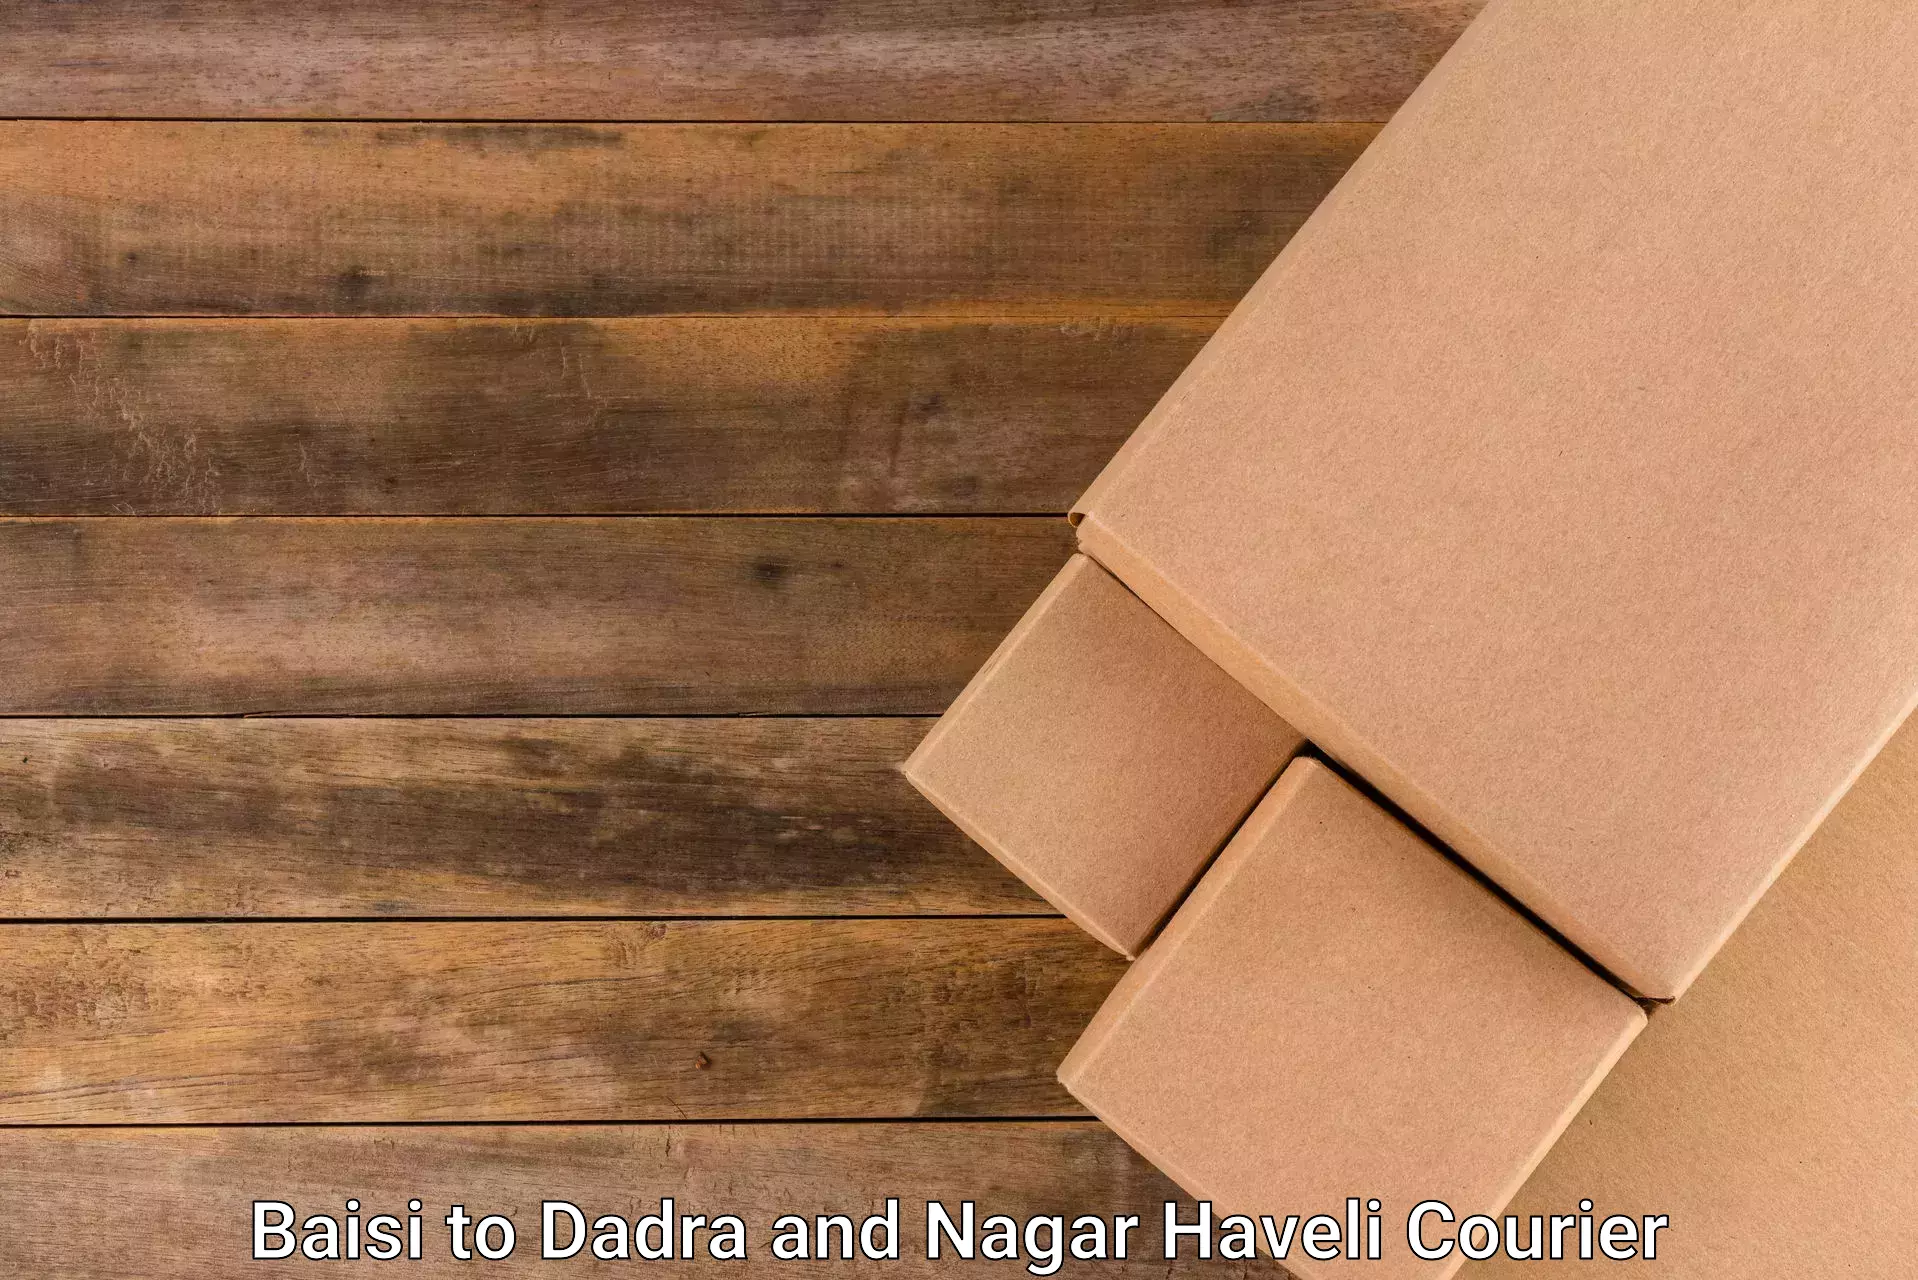 Easy access courier services in Baisi to Dadra and Nagar Haveli